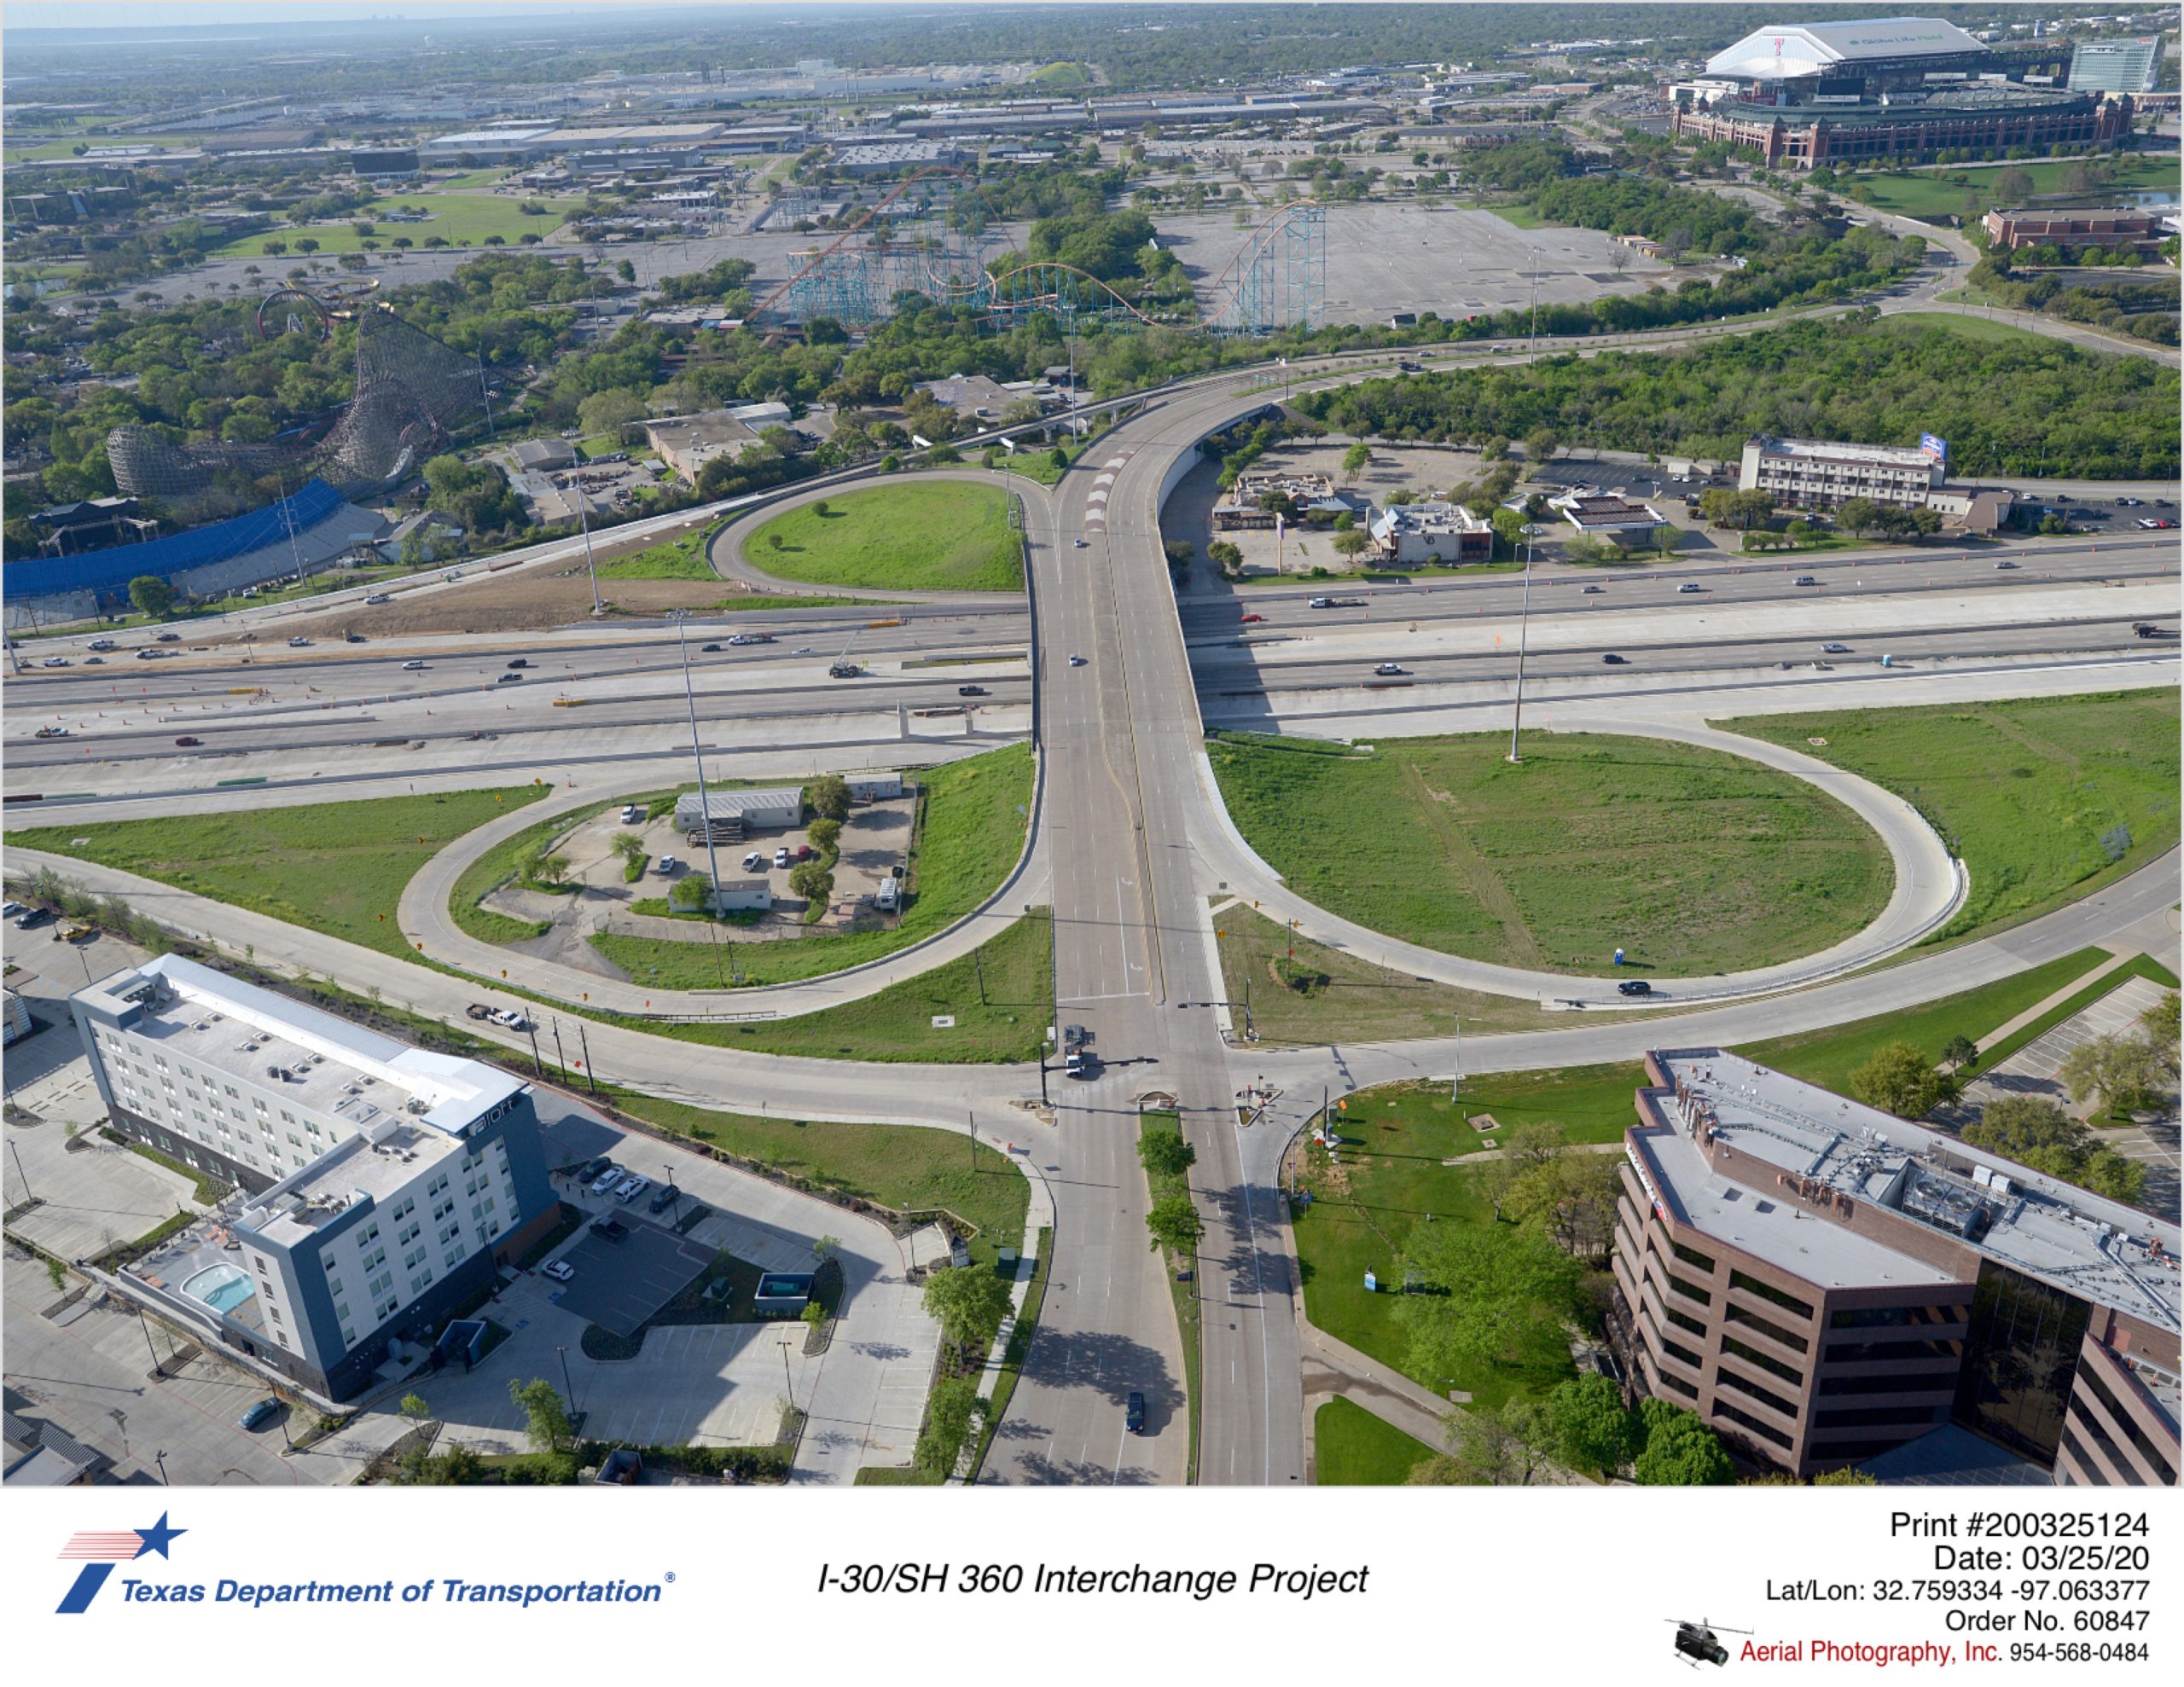 Ballpark Way interchange looking south with I-30 running left and right in mid-ground. Completed